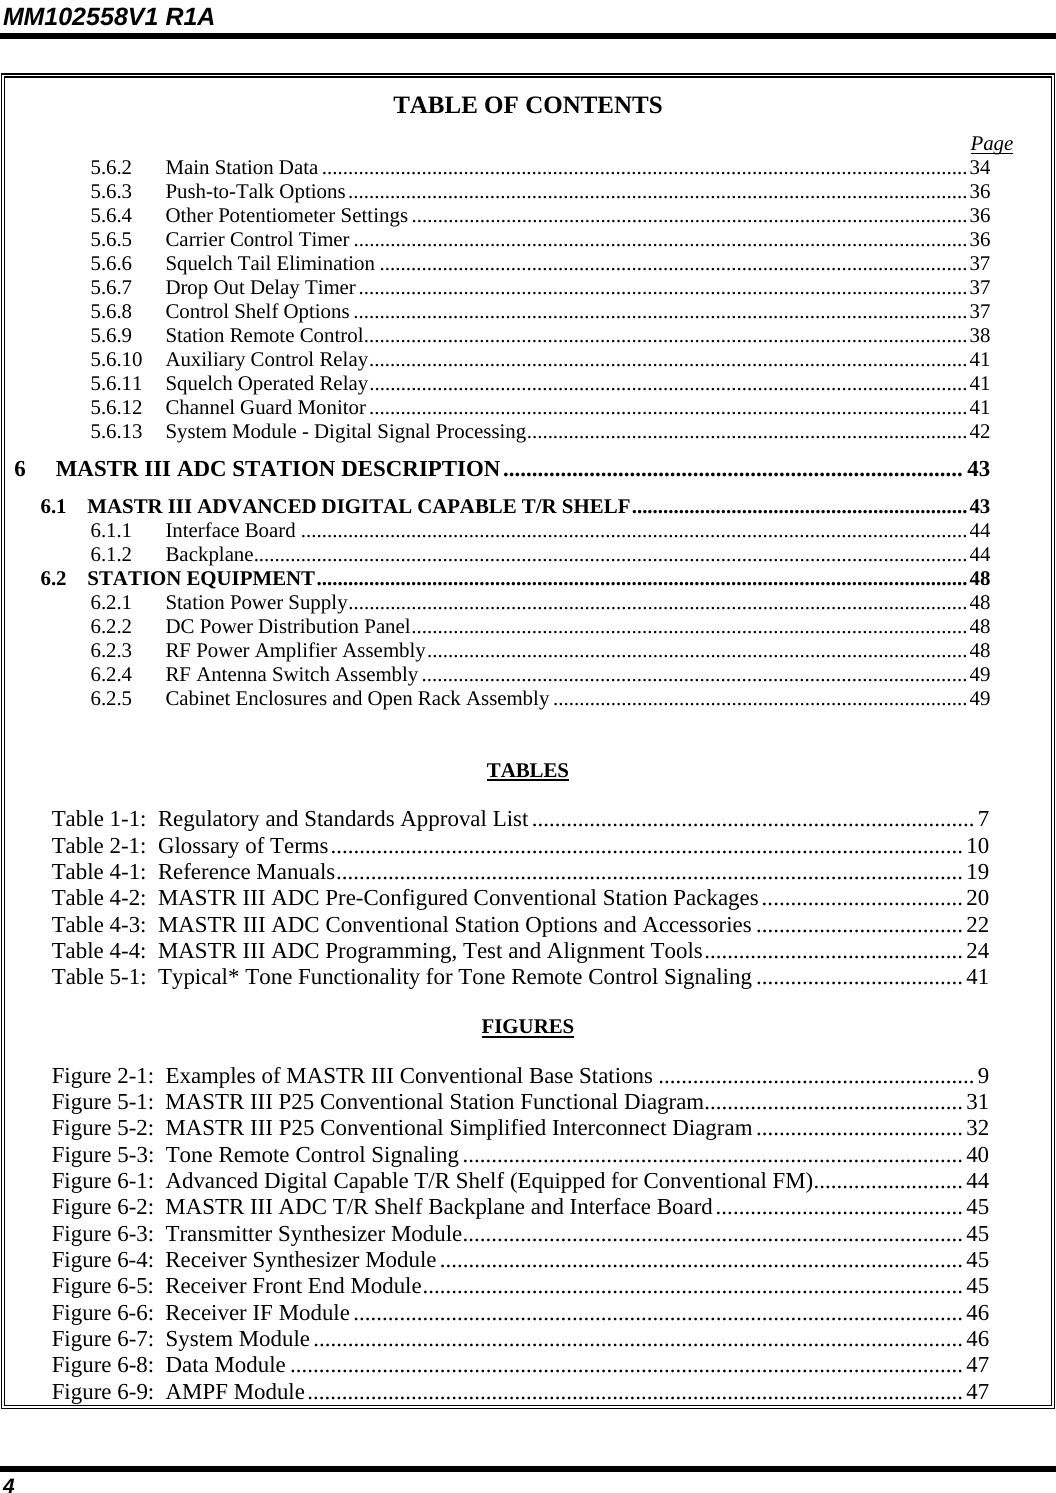 MM102558V1 R1A TABLE OF CONTENTS  Page5.6.2 Main Station Data ...........................................................................................................................34 5.6.3 Push-to-Talk Options......................................................................................................................36 5.6.4 Other Potentiometer Settings..........................................................................................................36 5.6.5 Carrier Control Timer .....................................................................................................................36 5.6.6 Squelch Tail Elimination ................................................................................................................37 5.6.7 Drop Out Delay Timer....................................................................................................................37 5.6.8 Control Shelf Options .....................................................................................................................37 5.6.9 Station Remote Control...................................................................................................................38 5.6.10 Auxiliary Control Relay..................................................................................................................41 5.6.11 Squelch Operated Relay..................................................................................................................41 5.6.12 Channel Guard Monitor..................................................................................................................41 5.6.13 System Module - Digital Signal Processing....................................................................................42 6 MASTR III ADC STATION DESCRIPTION................................................................................ 43 6.1 MASTR III ADVANCED DIGITAL CAPABLE T/R SHELF................................................................43 6.1.1 Interface Board ...............................................................................................................................44 6.1.2 Backplane........................................................................................................................................44 6.2 STATION EQUIPMENT............................................................................................................................48 6.2.1 Station Power Supply......................................................................................................................48 6.2.2 DC Power Distribution Panel..........................................................................................................48 6.2.3 RF Power Amplifier Assembly.......................................................................................................48 6.2.4 RF Antenna Switch Assembly........................................................................................................49 6.2.5 Cabinet Enclosures and Open Rack Assembly ...............................................................................49   TABLES  Table 1-1:  Regulatory and Standards Approval List.............................................................................7 Table 2-1:  Glossary of Terms..............................................................................................................10 Table 4-1:  Reference Manuals.............................................................................................................19 Table 4-2:  MASTR III ADC Pre-Configured Conventional Station Packages................................... 20 Table 4-3:  MASTR III ADC Conventional Station Options and Accessories ....................................22 Table 4-4:  MASTR III ADC Programming, Test and Alignment Tools.............................................24 Table 5-1:  Typical* Tone Functionality for Tone Remote Control Signaling ....................................41  FIGURES  Figure 2-1:  Examples of MASTR III Conventional Base Stations .......................................................9 Figure 5-1:  MASTR III P25 Conventional Station Functional Diagram.............................................31 Figure 5-2:  MASTR III P25 Conventional Simplified Interconnect Diagram....................................32 Figure 5-3:  Tone Remote Control Signaling....................................................................................... 40 Figure 6-1:  Advanced Digital Capable T/R Shelf (Equipped for Conventional FM)..........................44 Figure 6-2:  MASTR III ADC T/R Shelf Backplane and Interface Board...........................................45 Figure 6-3:  Transmitter Synthesizer Module.......................................................................................45 Figure 6-4:  Receiver Synthesizer Module...........................................................................................45 Figure 6-5:  Receiver Front End Module..............................................................................................45 Figure 6-6:  Receiver IF Module ..........................................................................................................46 Figure 6-7:  System Module.................................................................................................................46 Figure 6-8:  Data Module .....................................................................................................................47 Figure 6-9:  AMPF Module.................................................................................................................. 47 4 